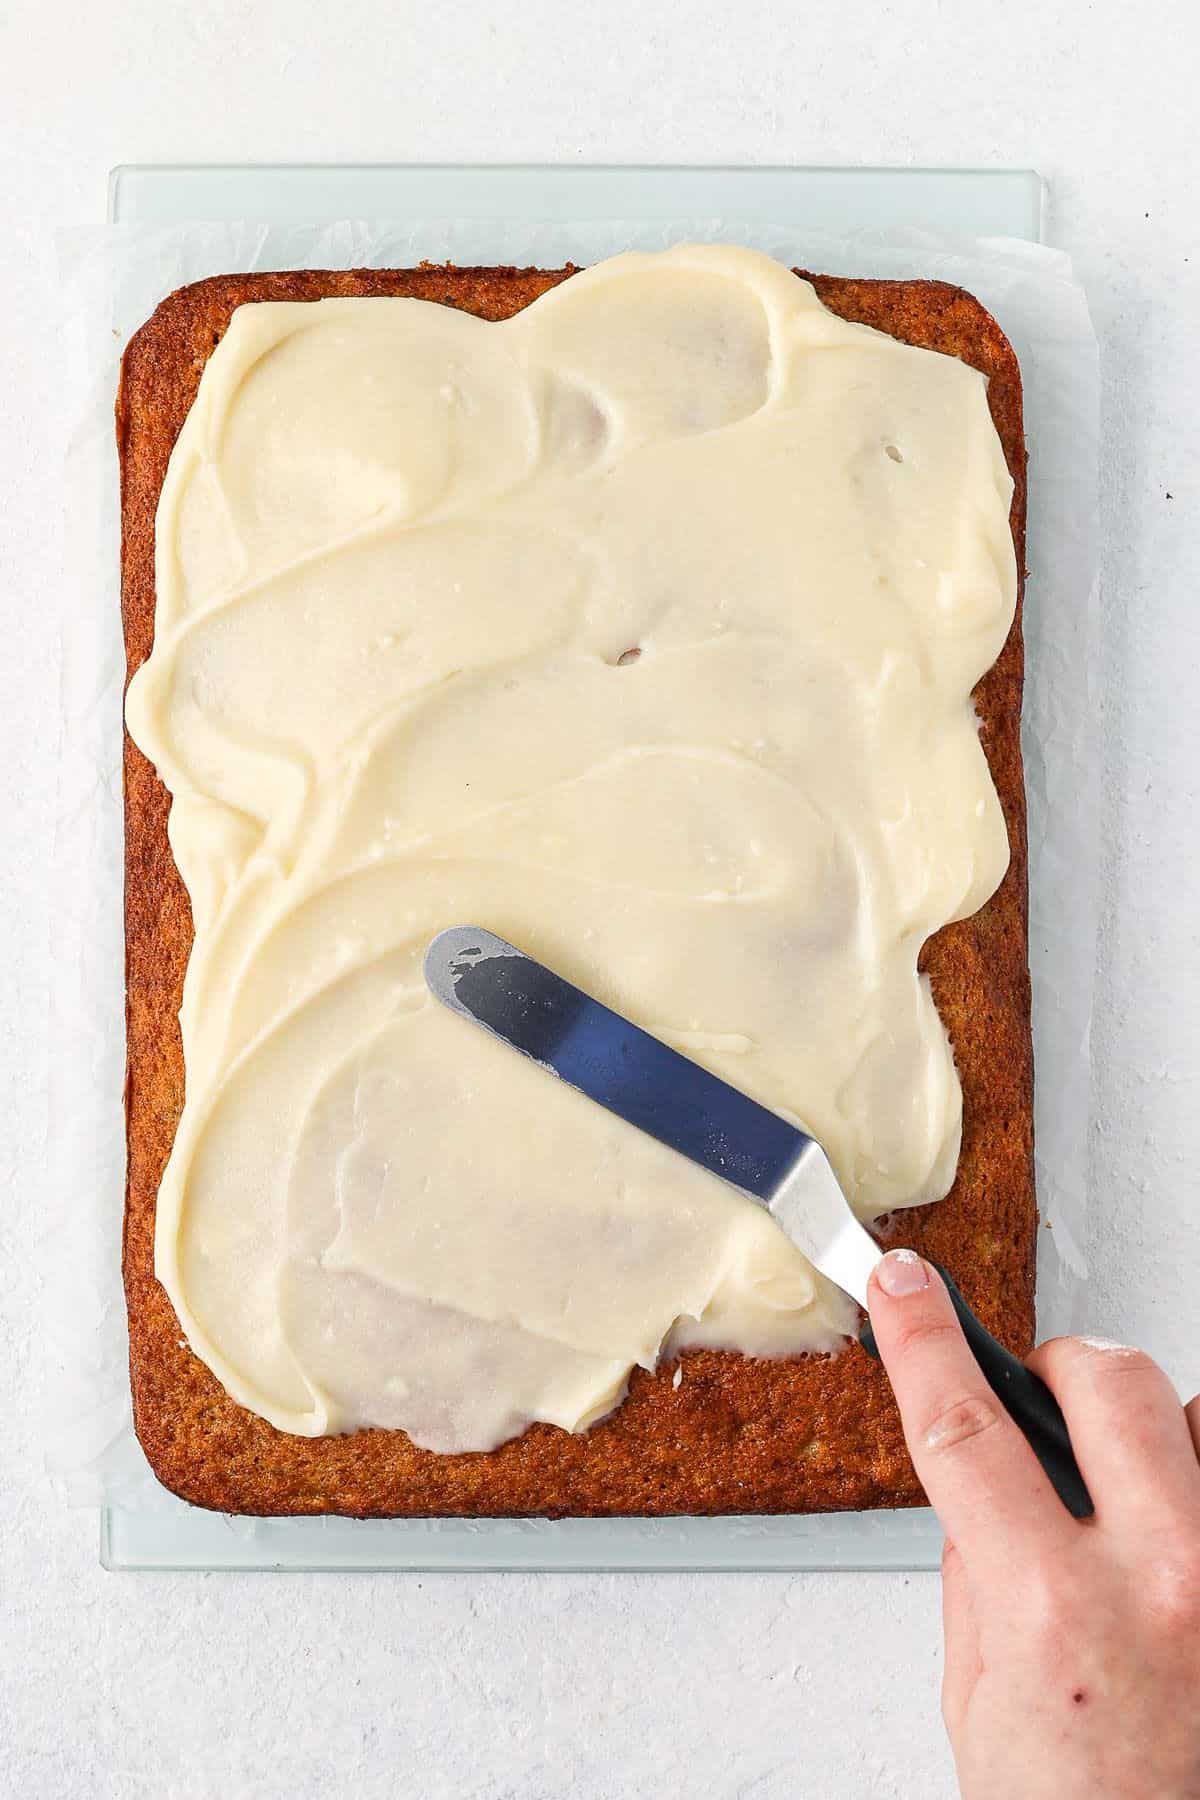 Banana Slice being iced with cream cheese frosting, showing a hand with a palette knife smoothing frosting.